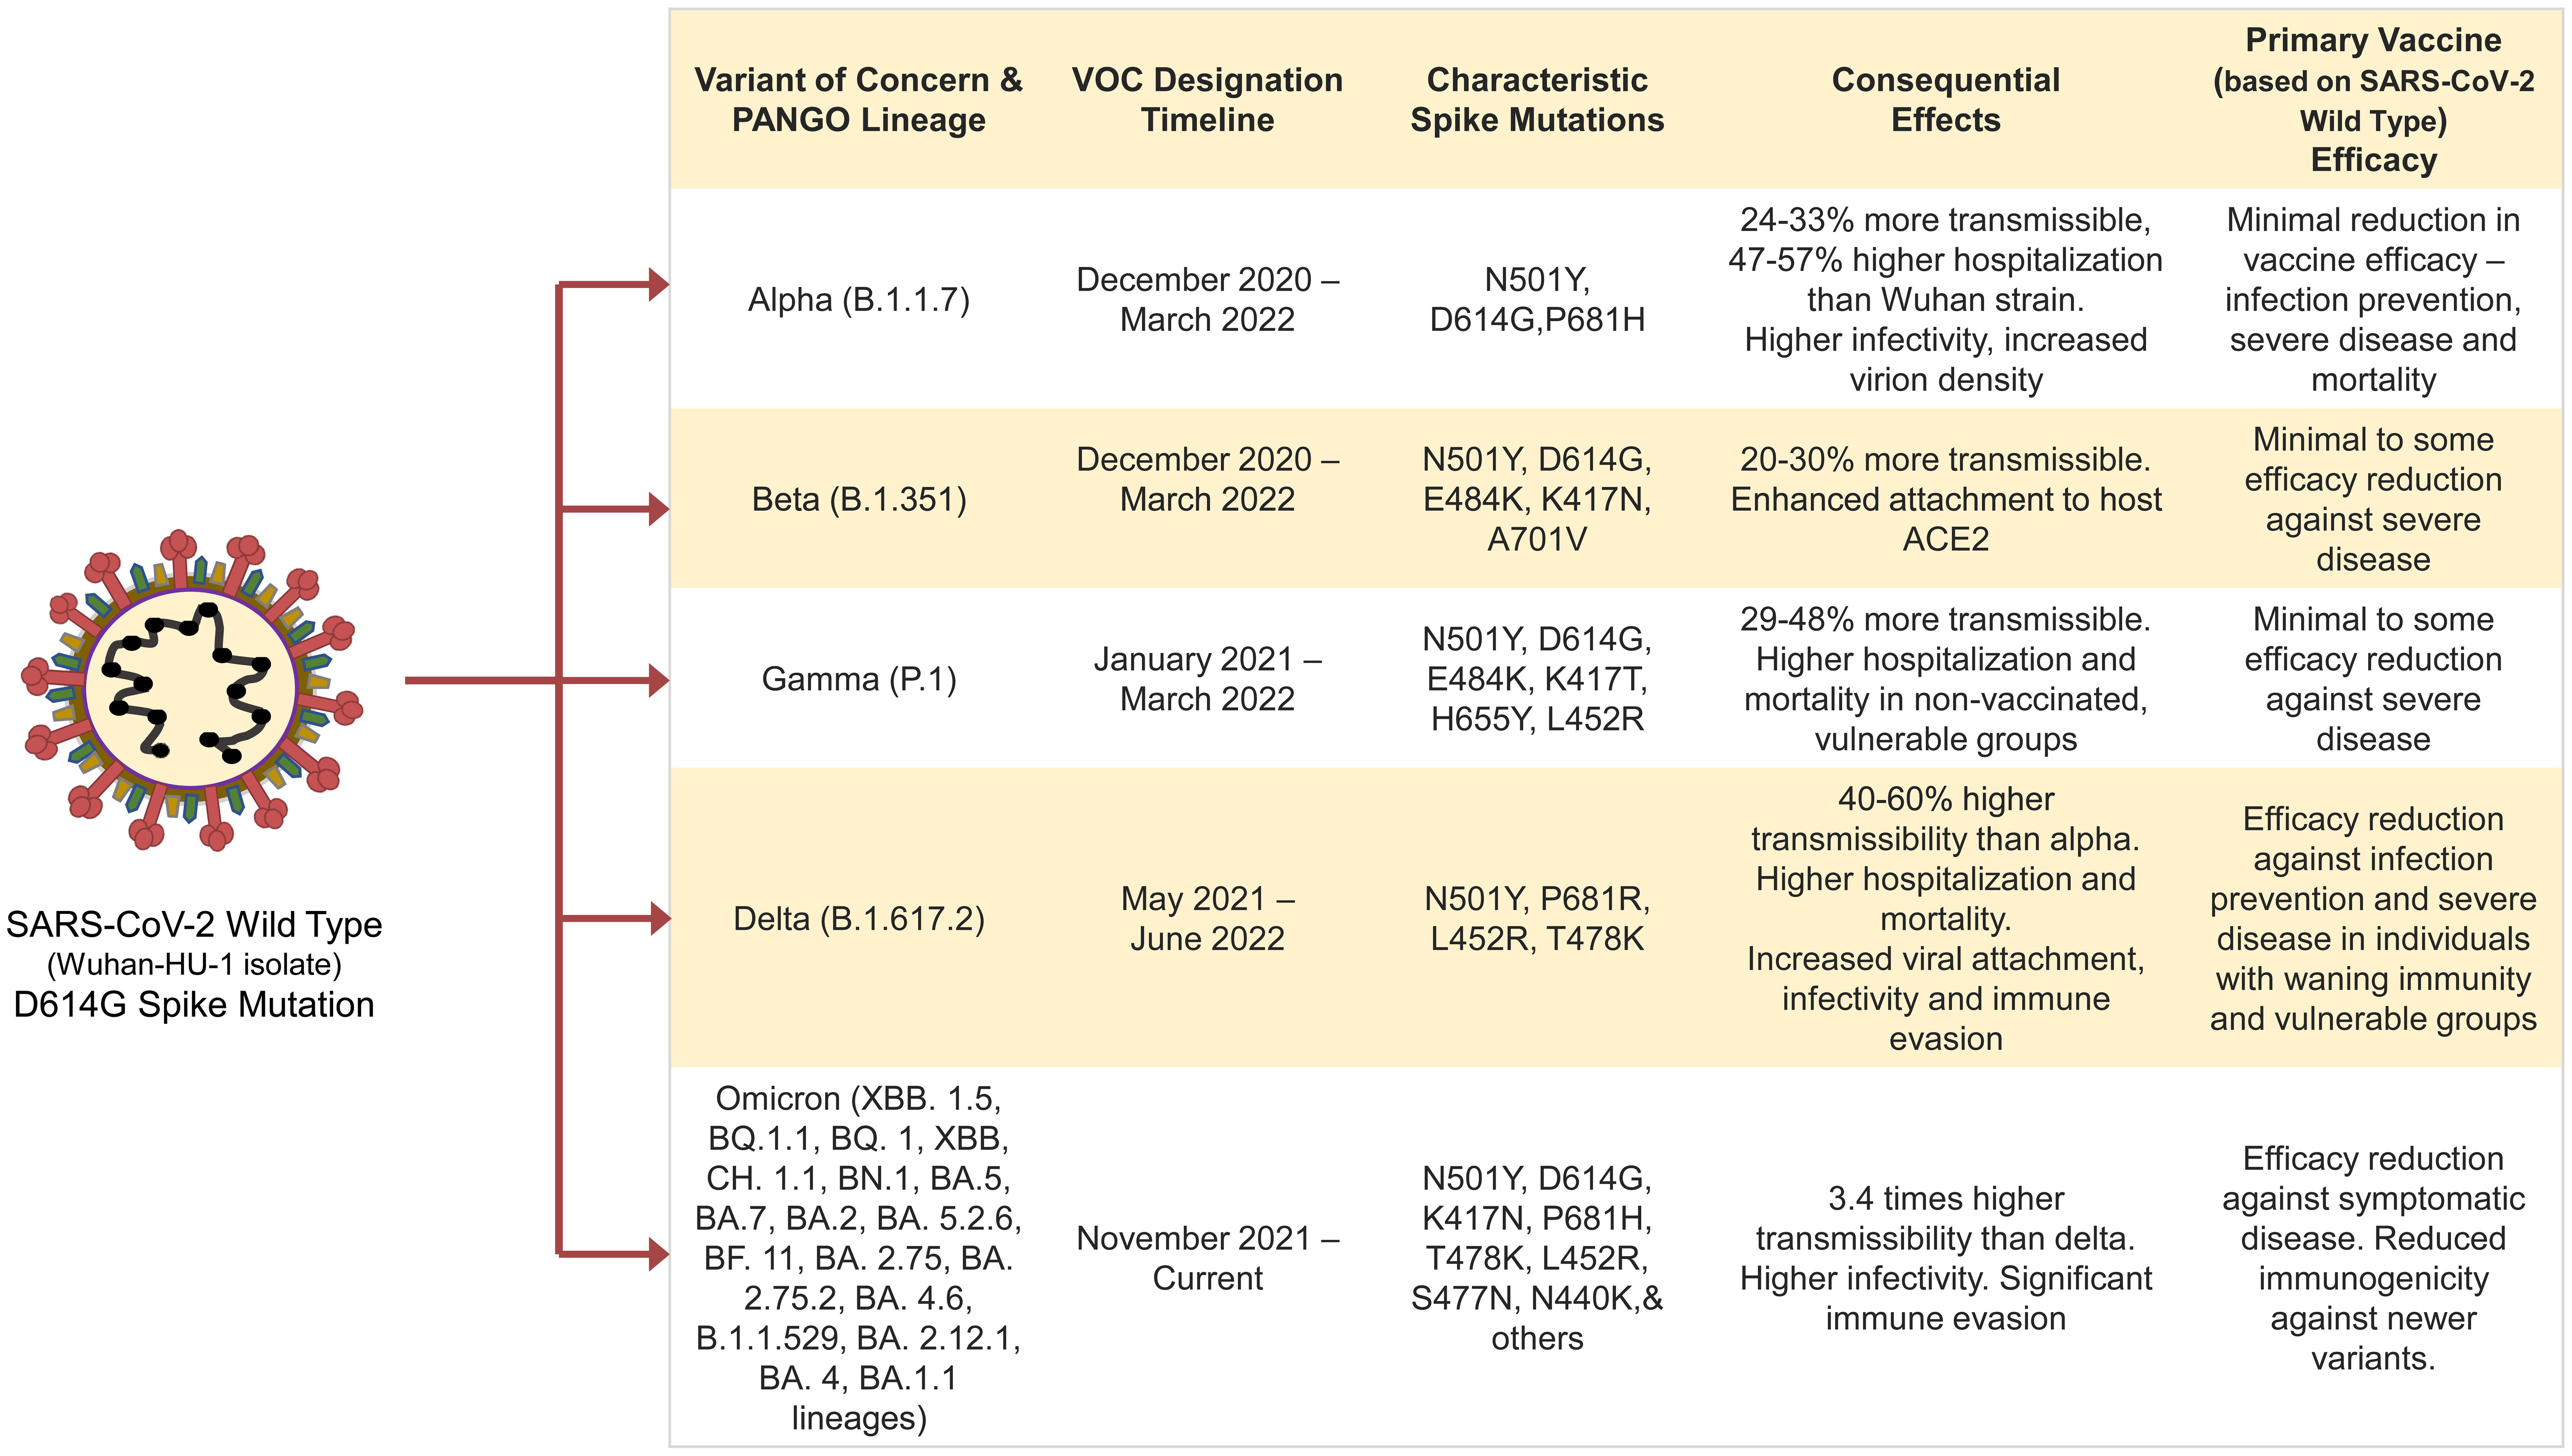 Summary of the SARS-CoV-2 VOCs characteristic spike mutations and efficacy of primary immunization series.